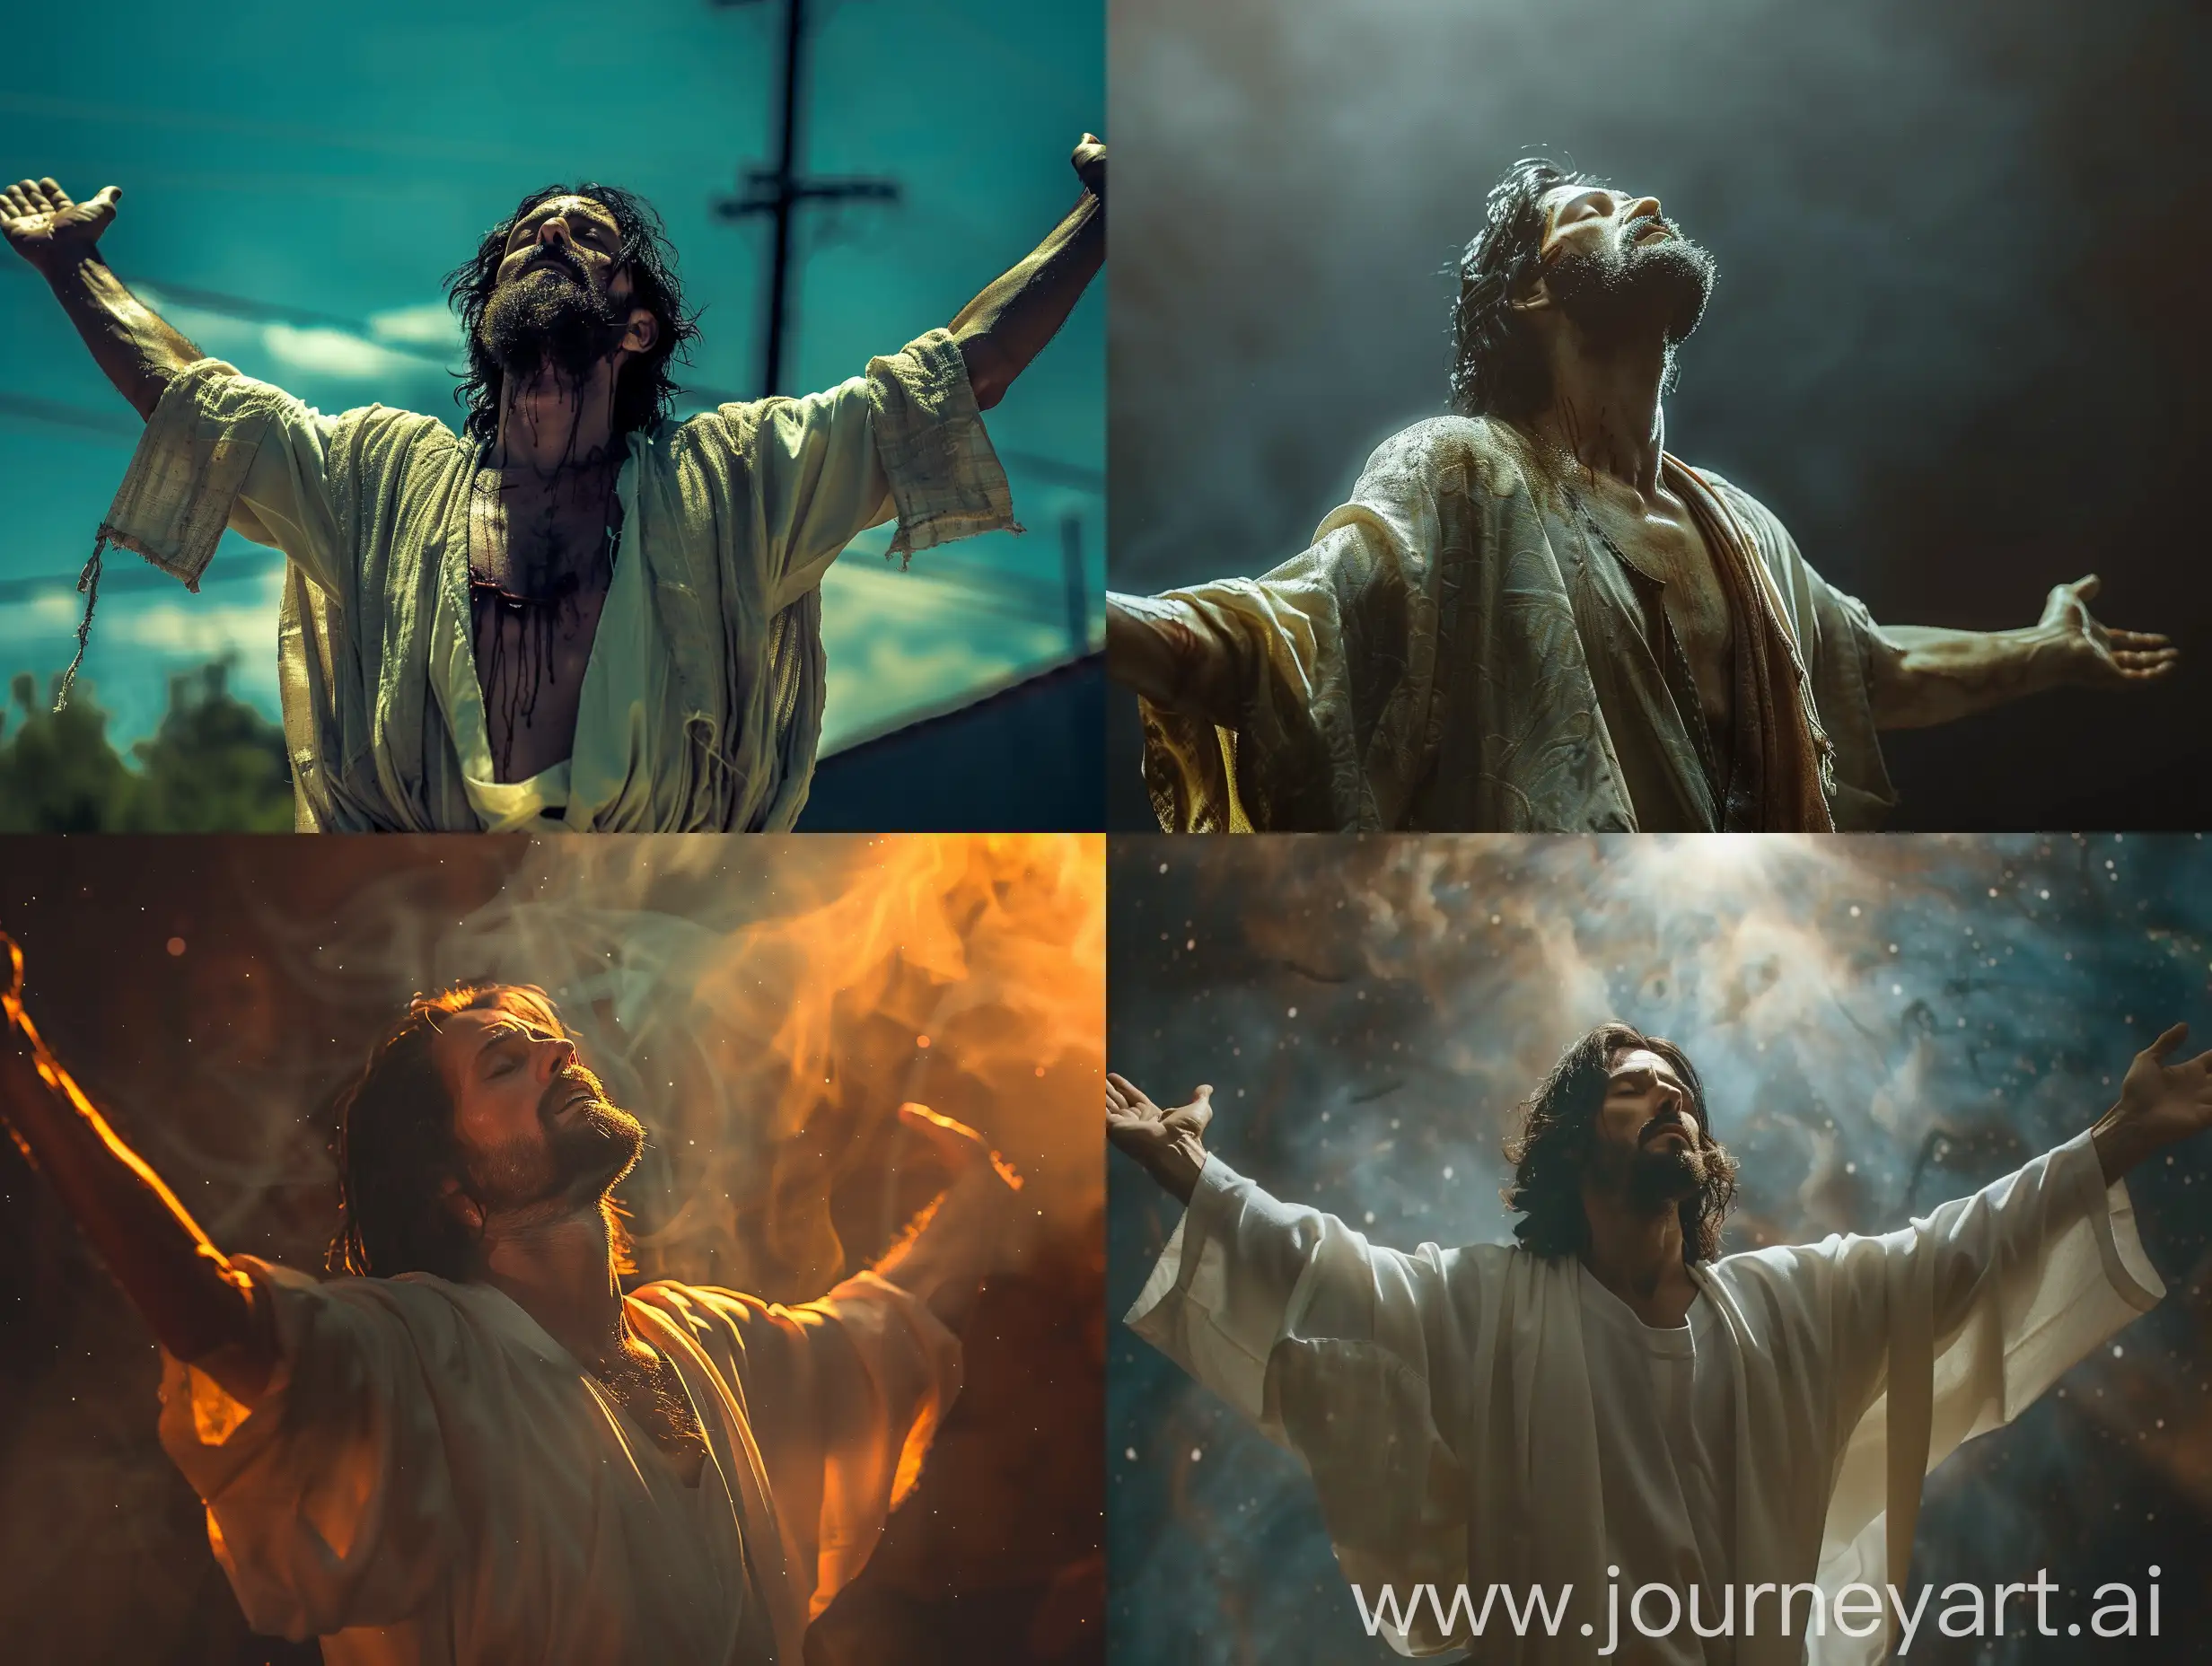 Cinematic-Shot-of-Jesus-Christ-Praying-with-Arms-Raised-to-Heaven